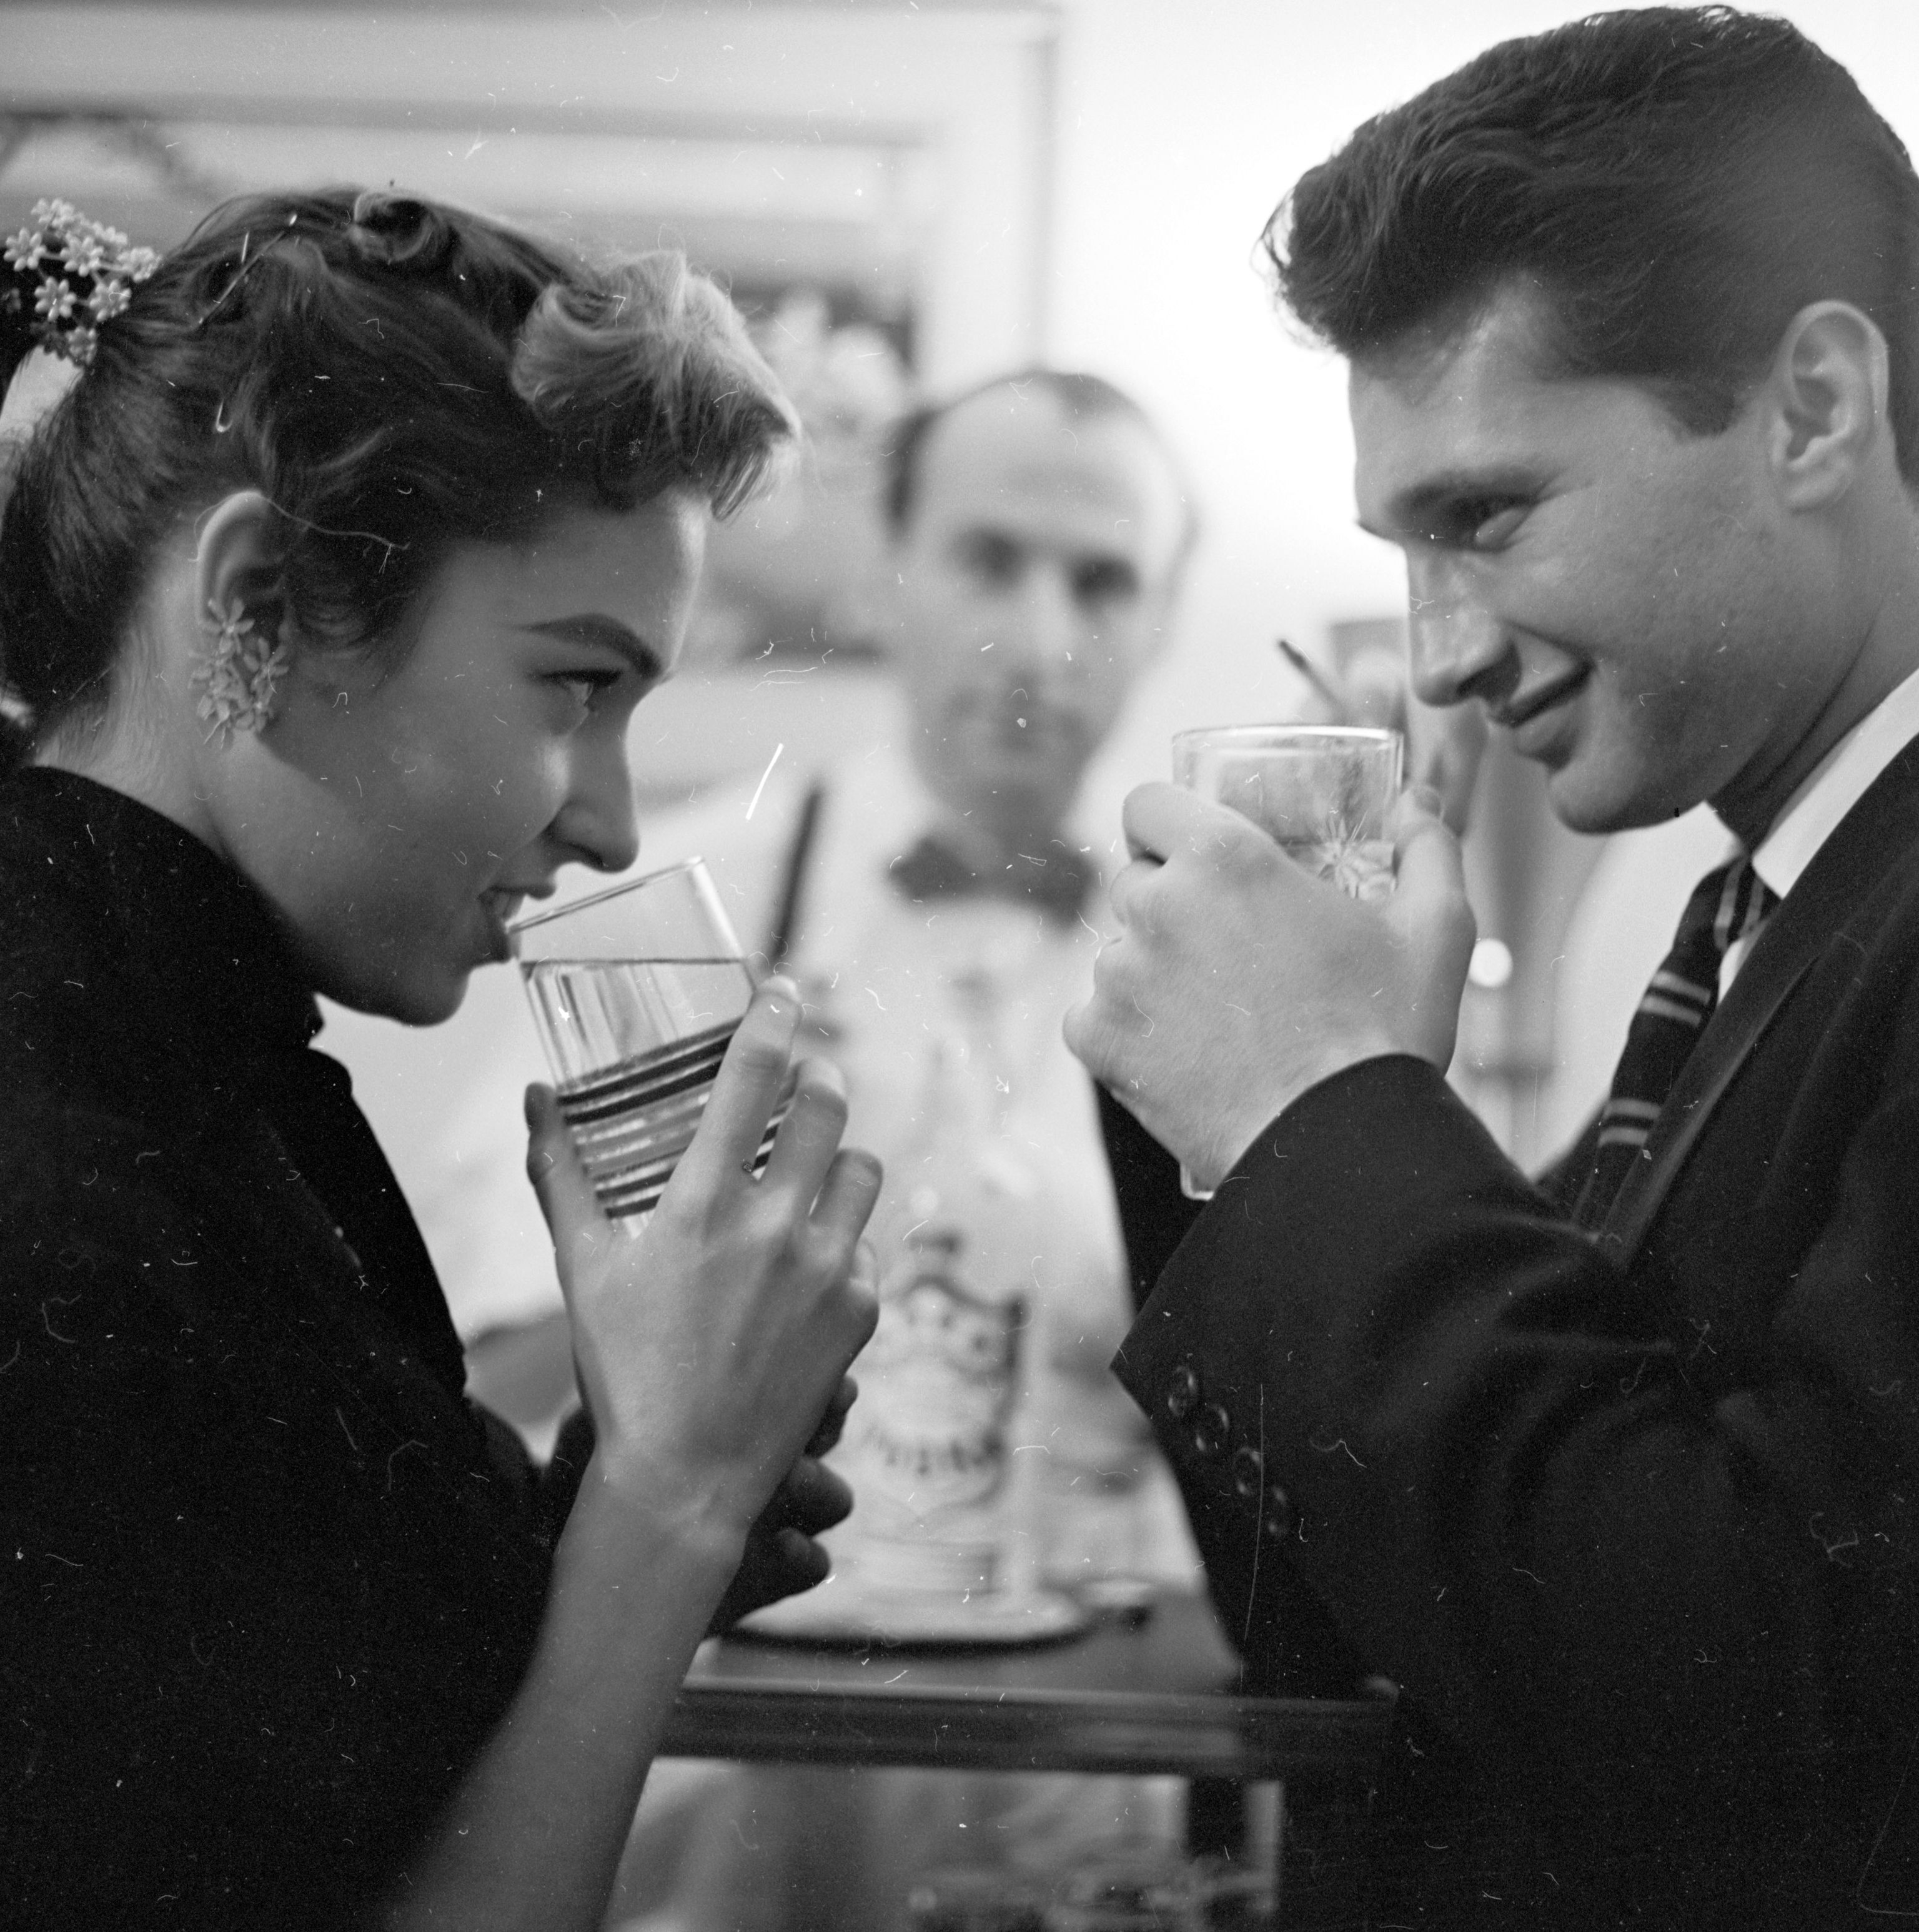 circa 1955: A bartender waits attentively on a young couple out on a date.